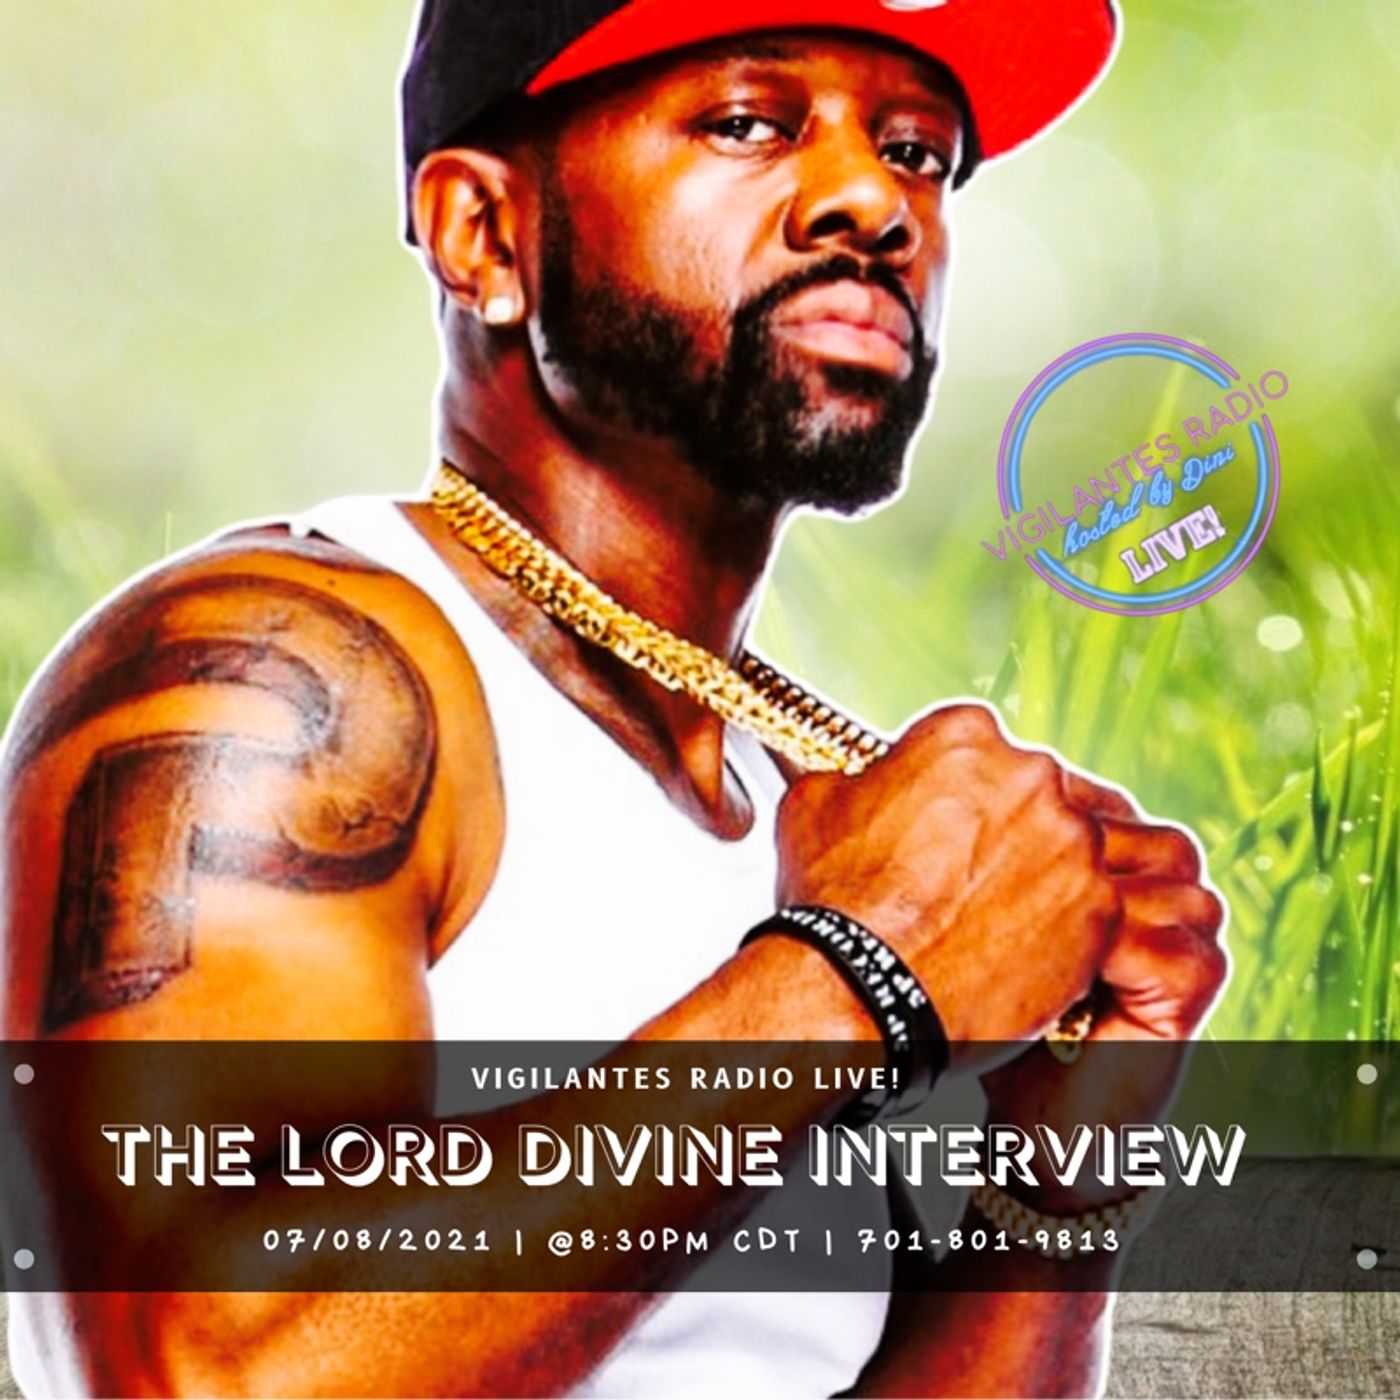 The Lord Divine Interview. Image